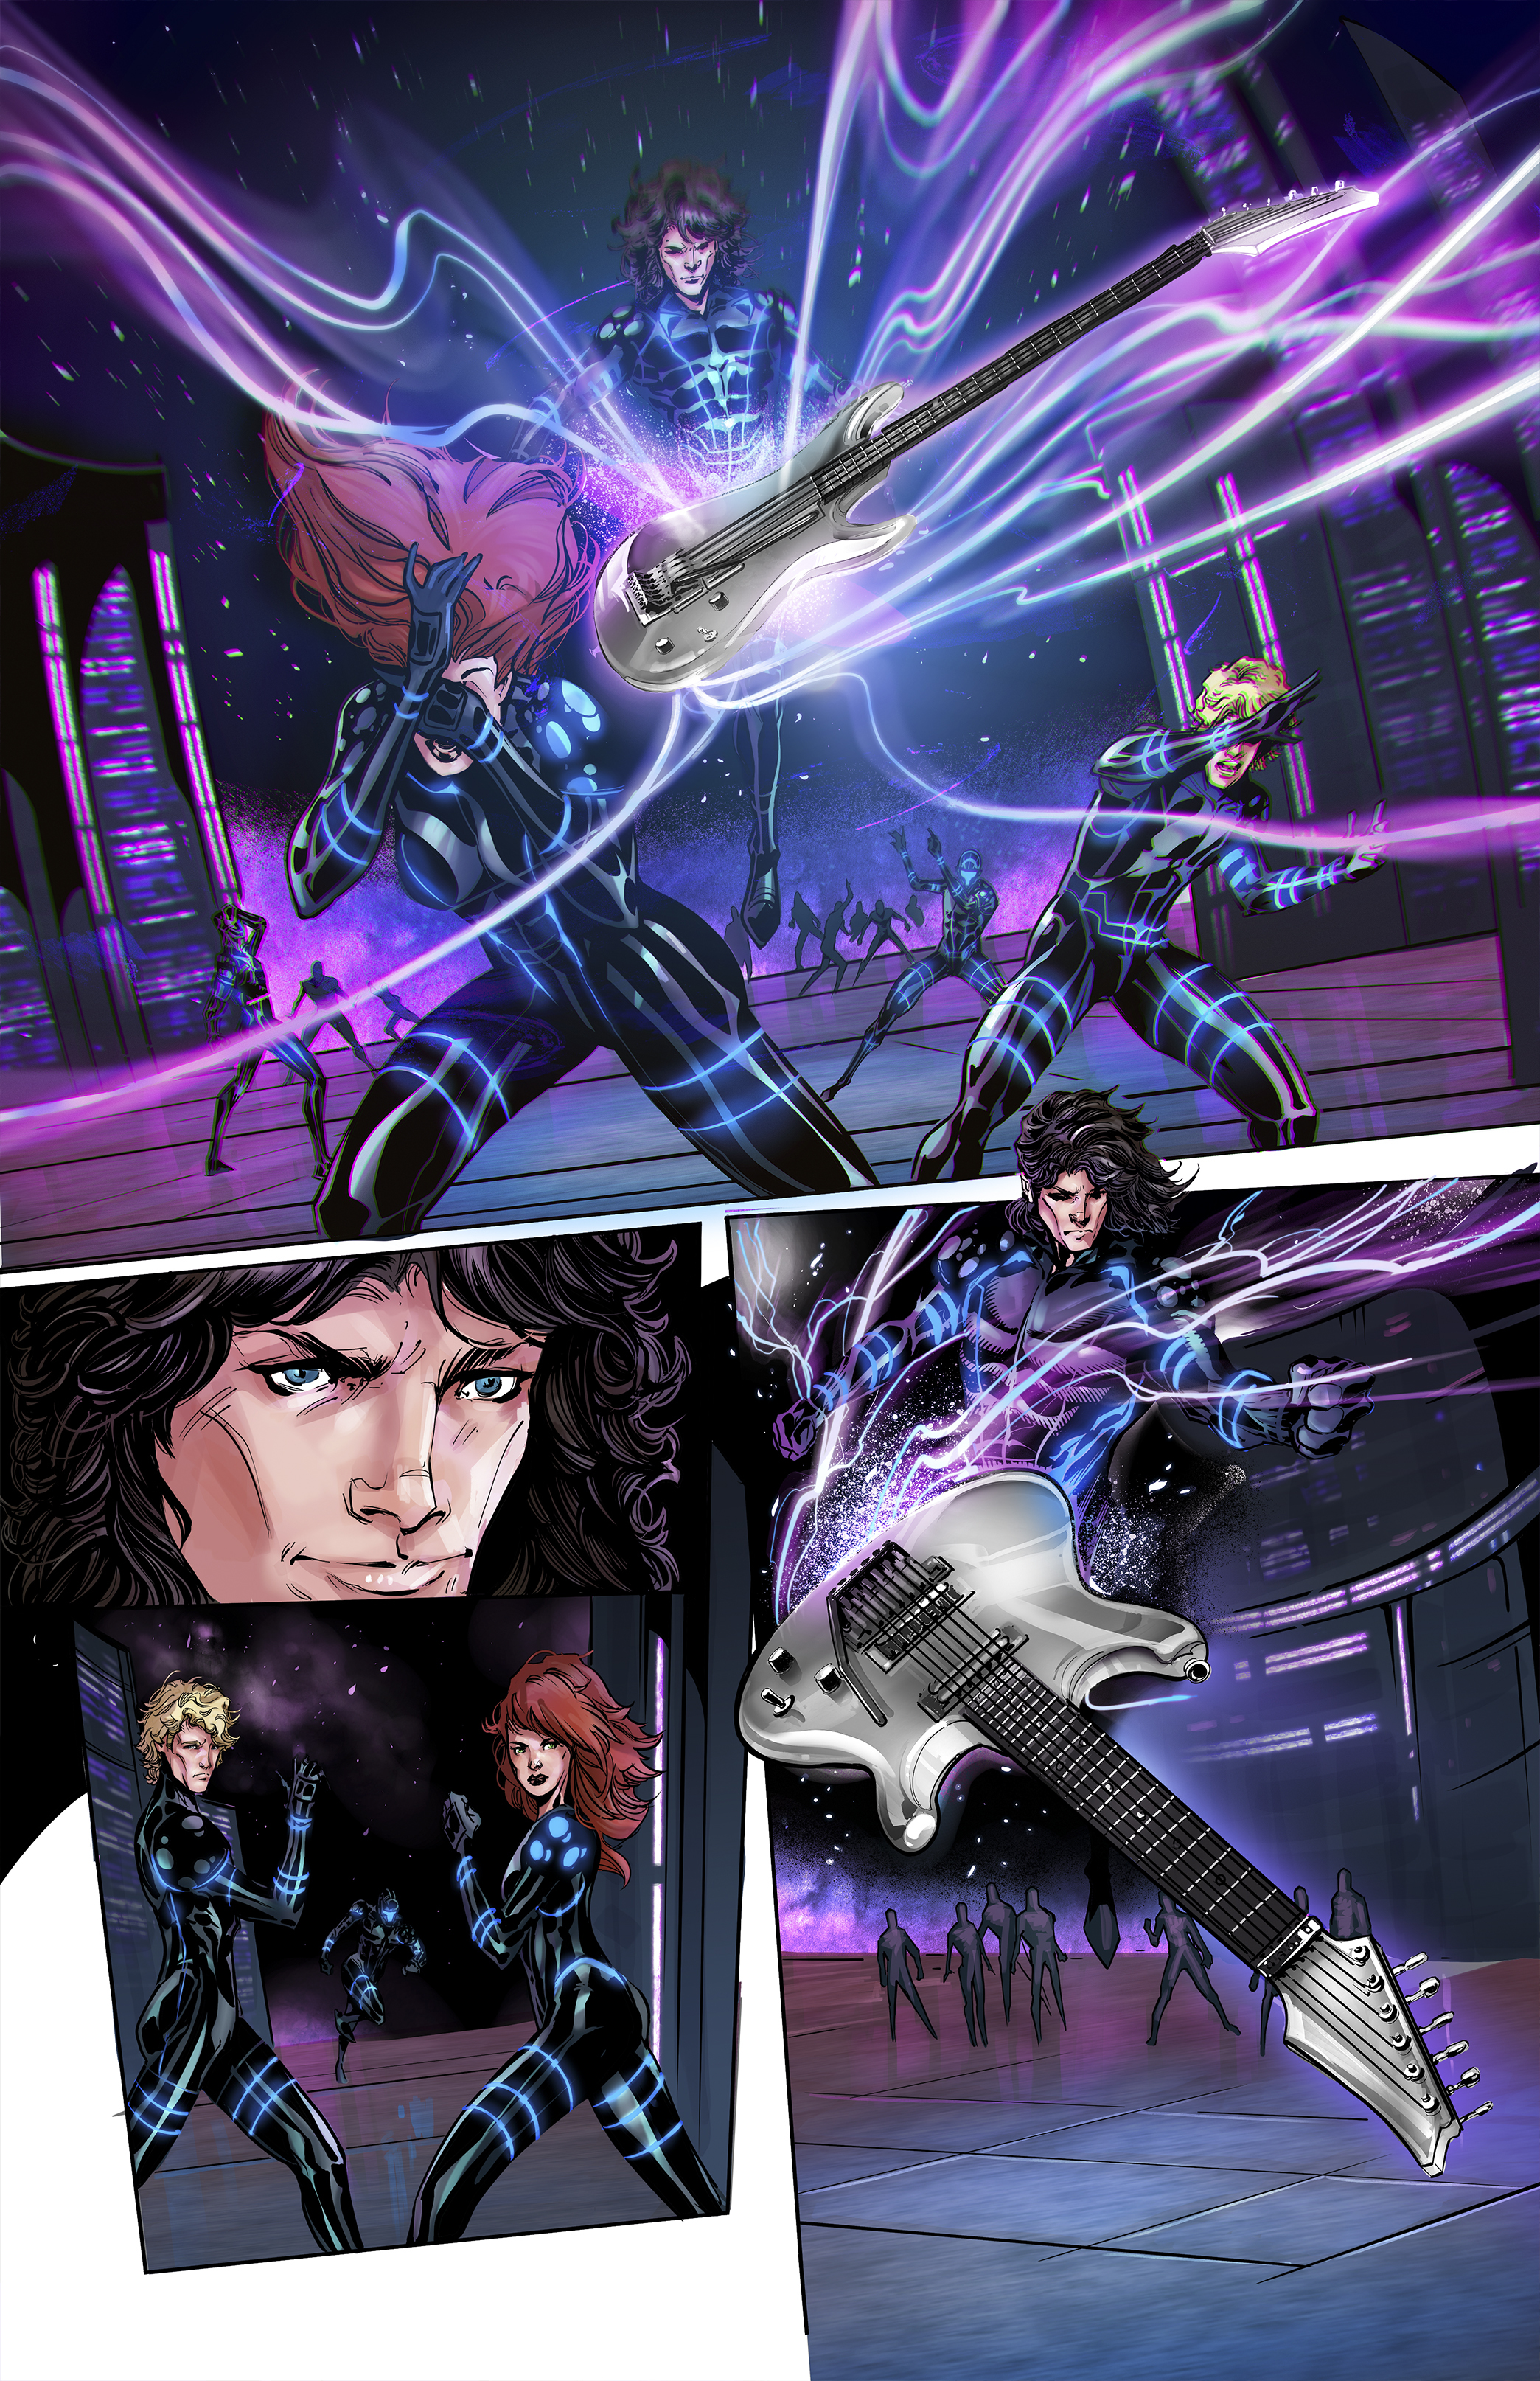 JOE SATRIANI’s ‘Crystal Planet’ Comic Book Set to Release Issue #2